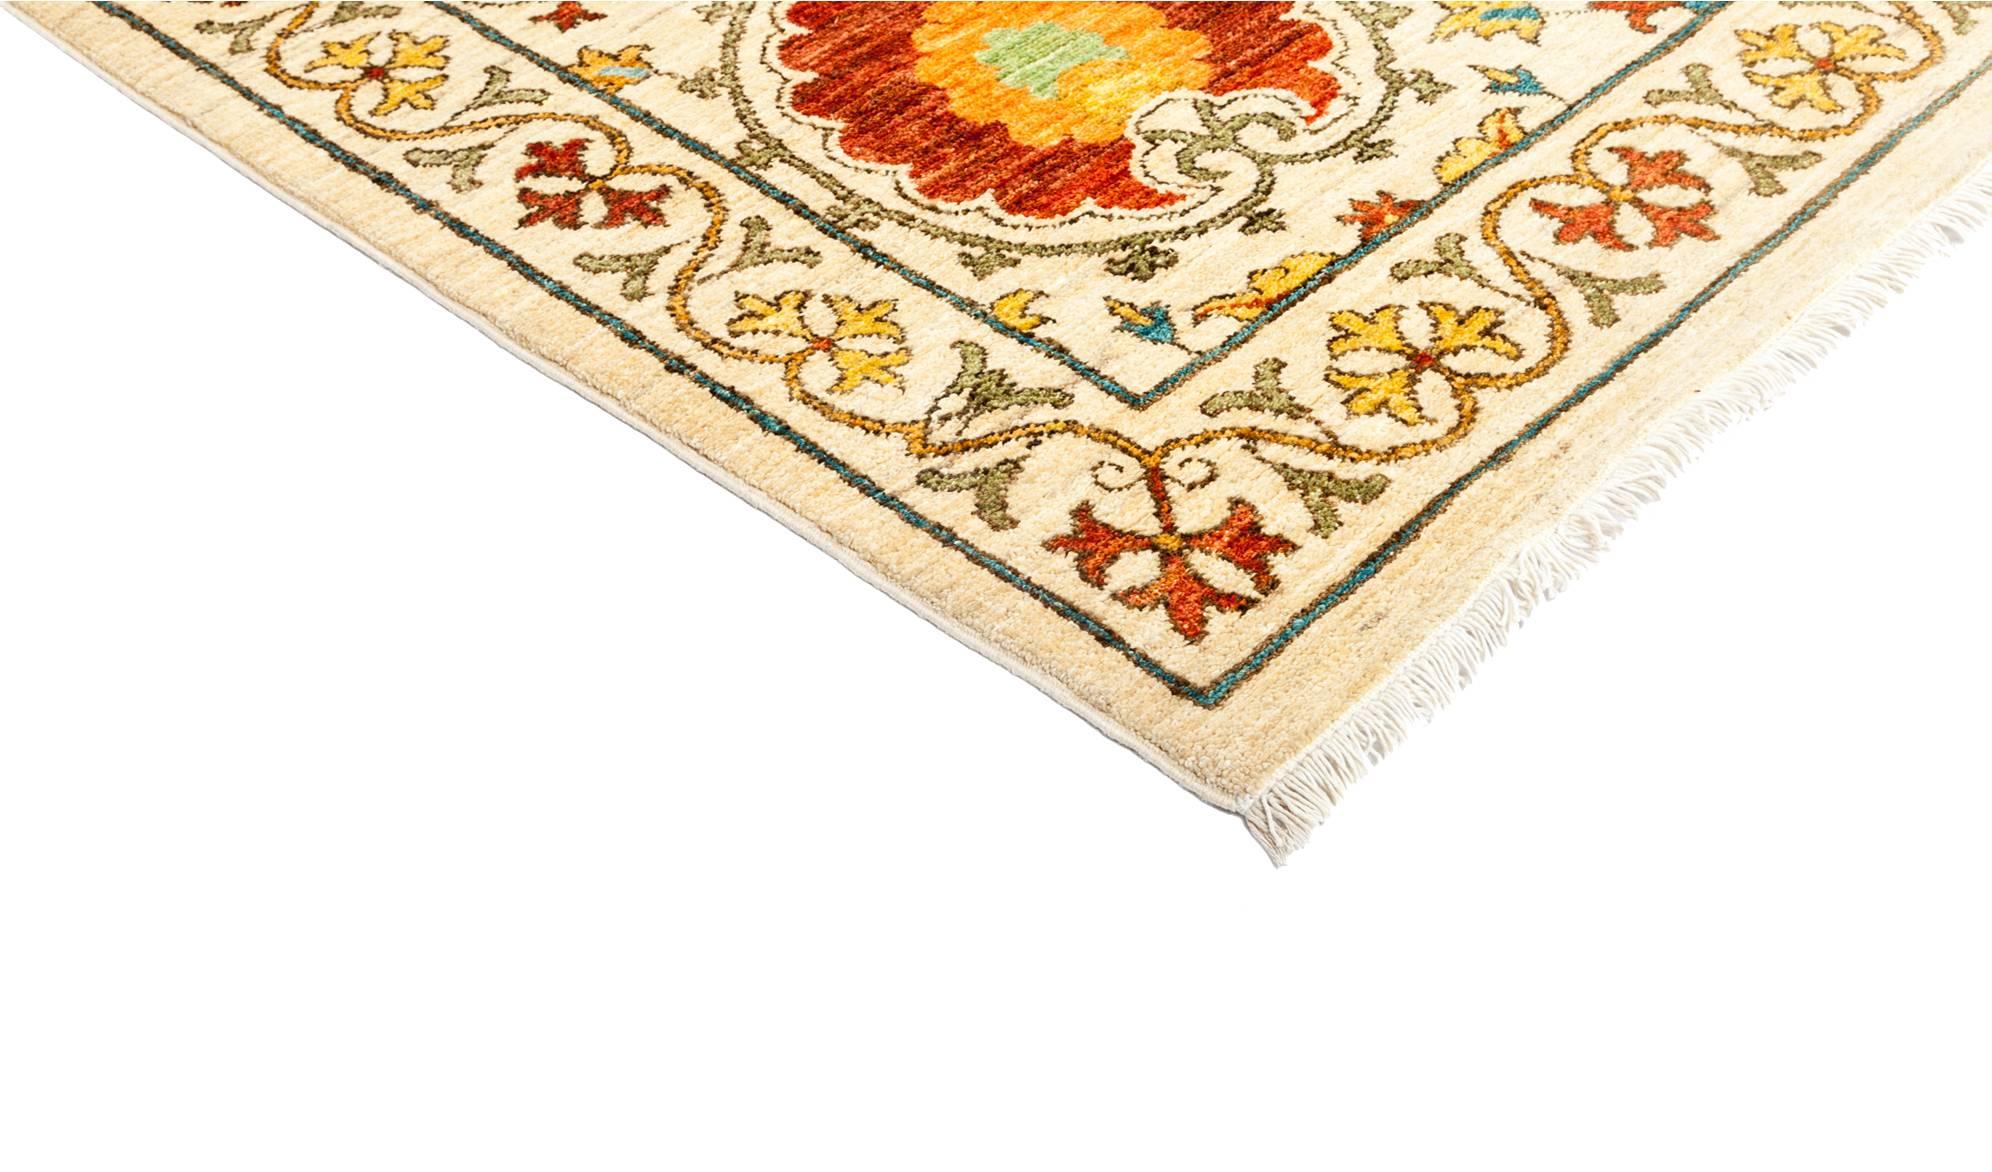 Inspired by embroidered Suzani textiles from Uzbekistan, this rug features floral motifs in modern palettes and compositions. Hand-knotted of vegetable-dyed wool, the rugs are designed to retain their vibrancy for generations to come. Measure: 9' x